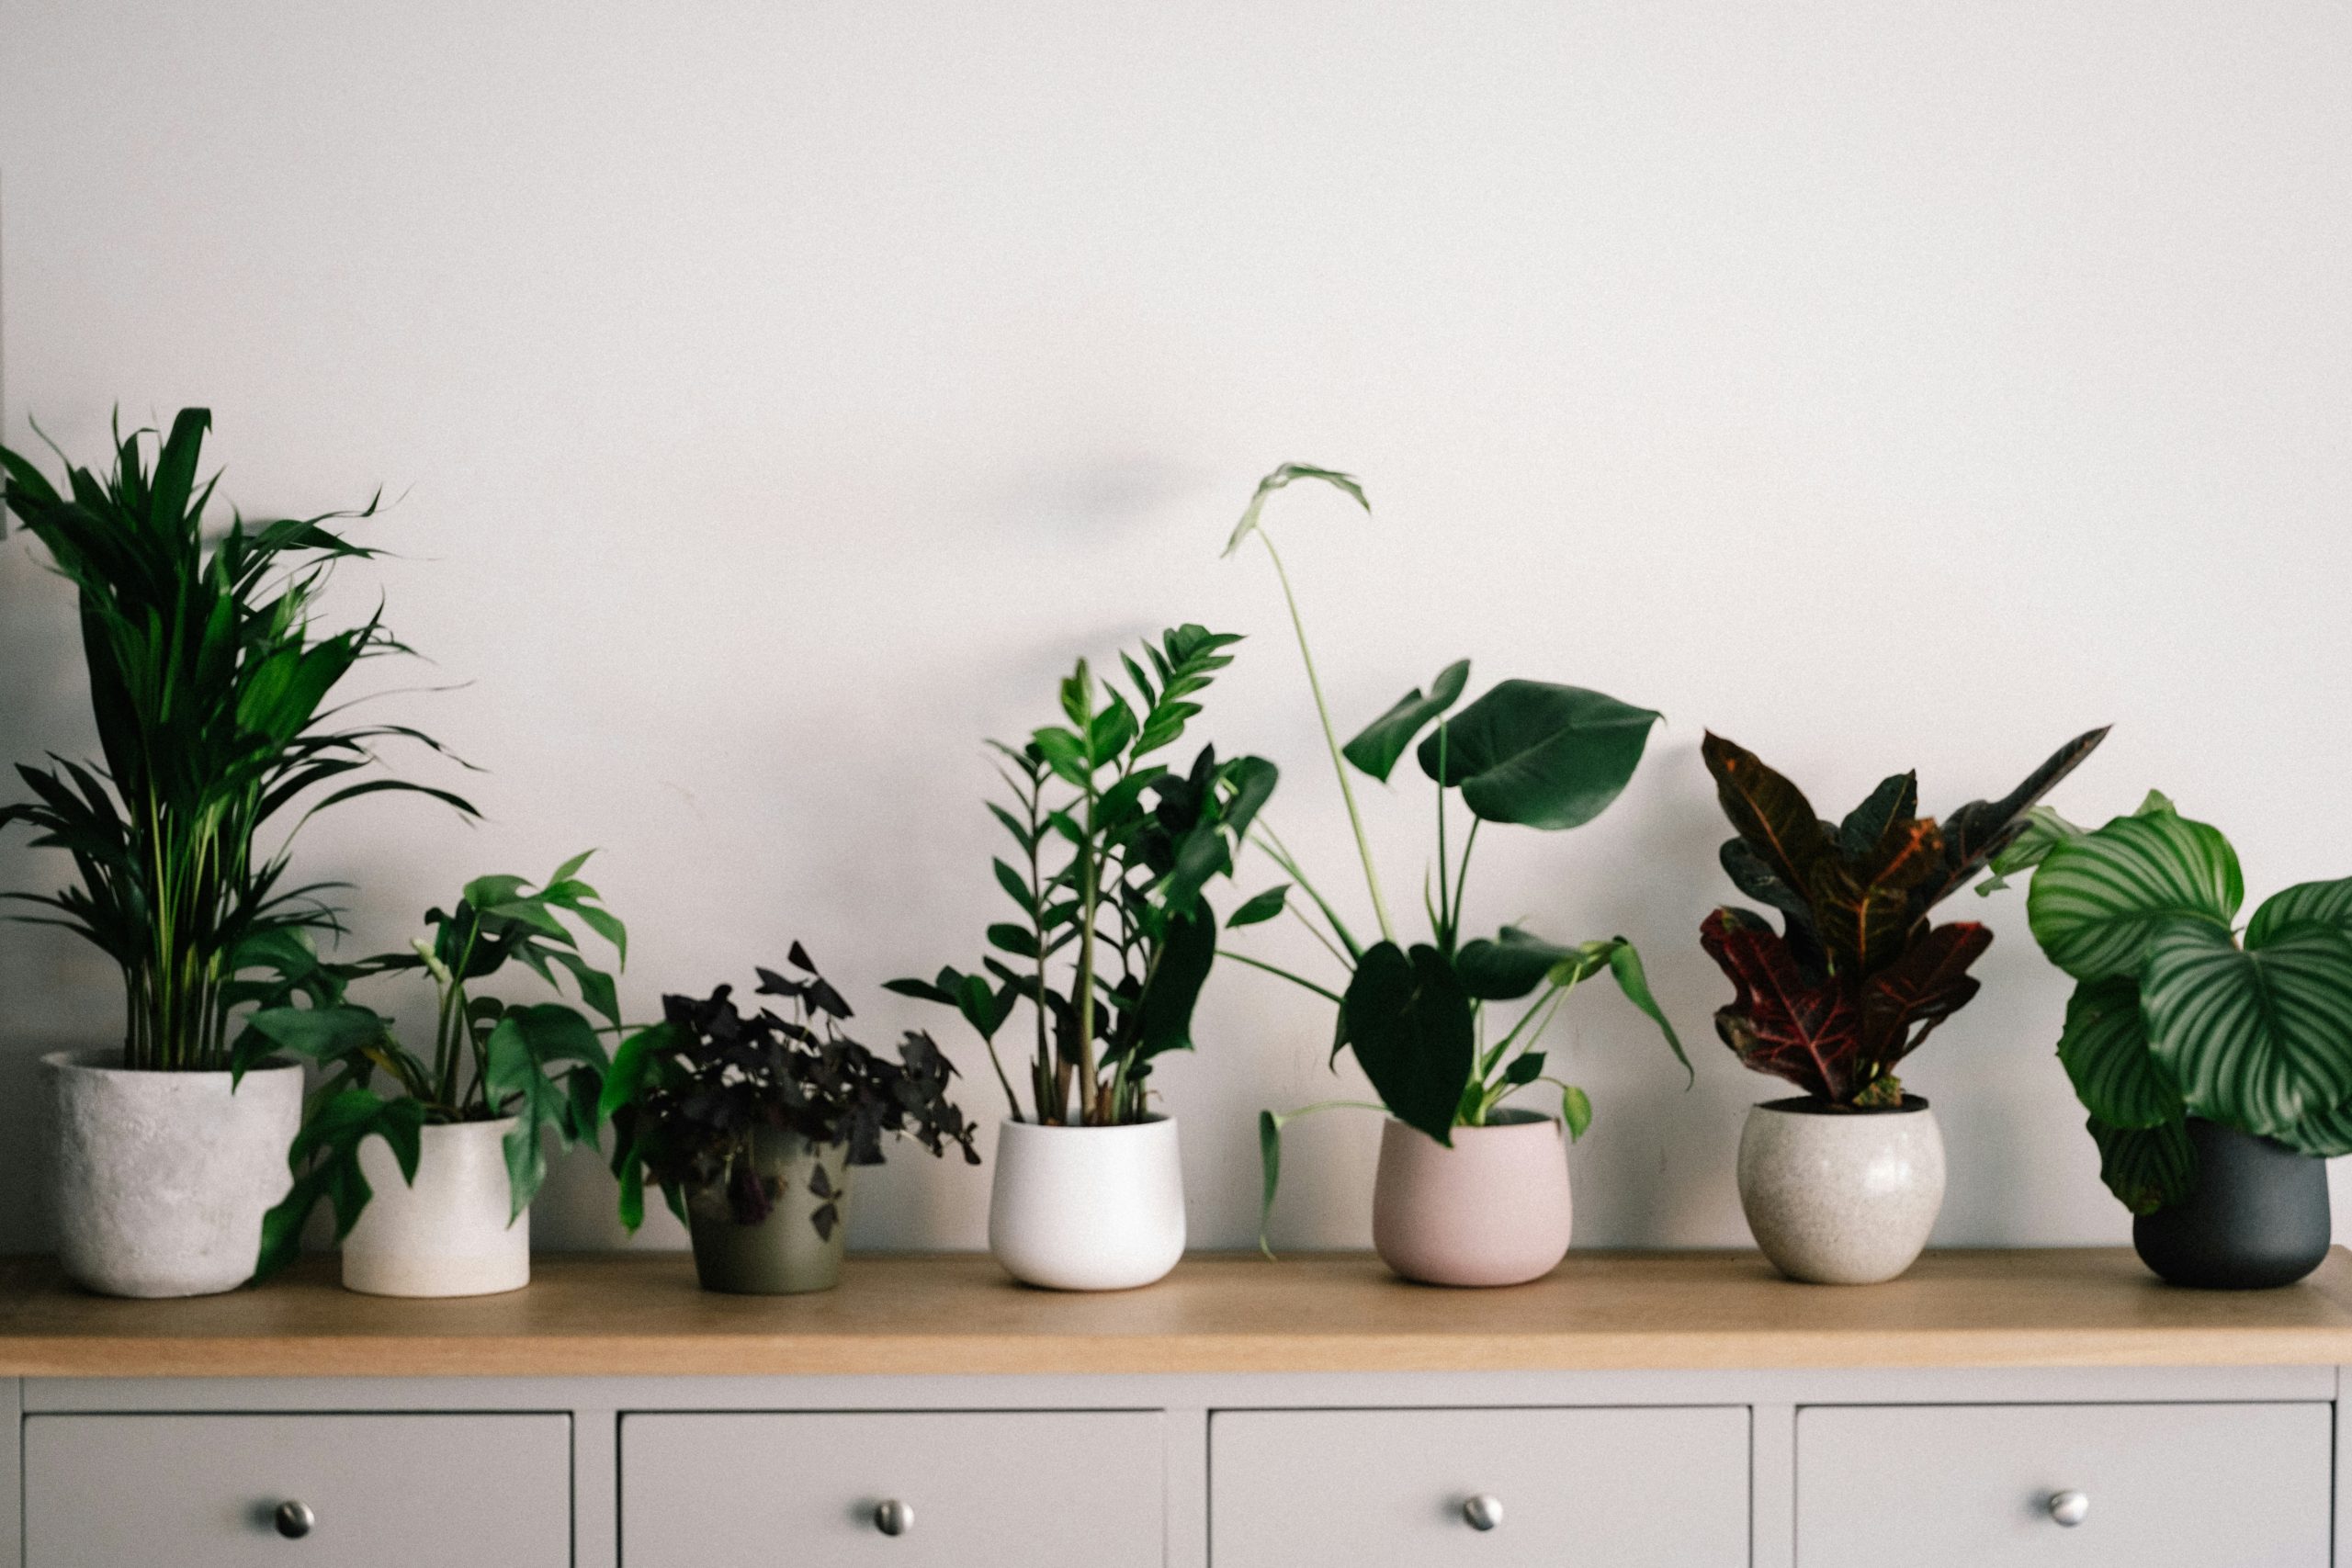 Which Plants Are Most Helpful for Improving Indoor Air Quality?